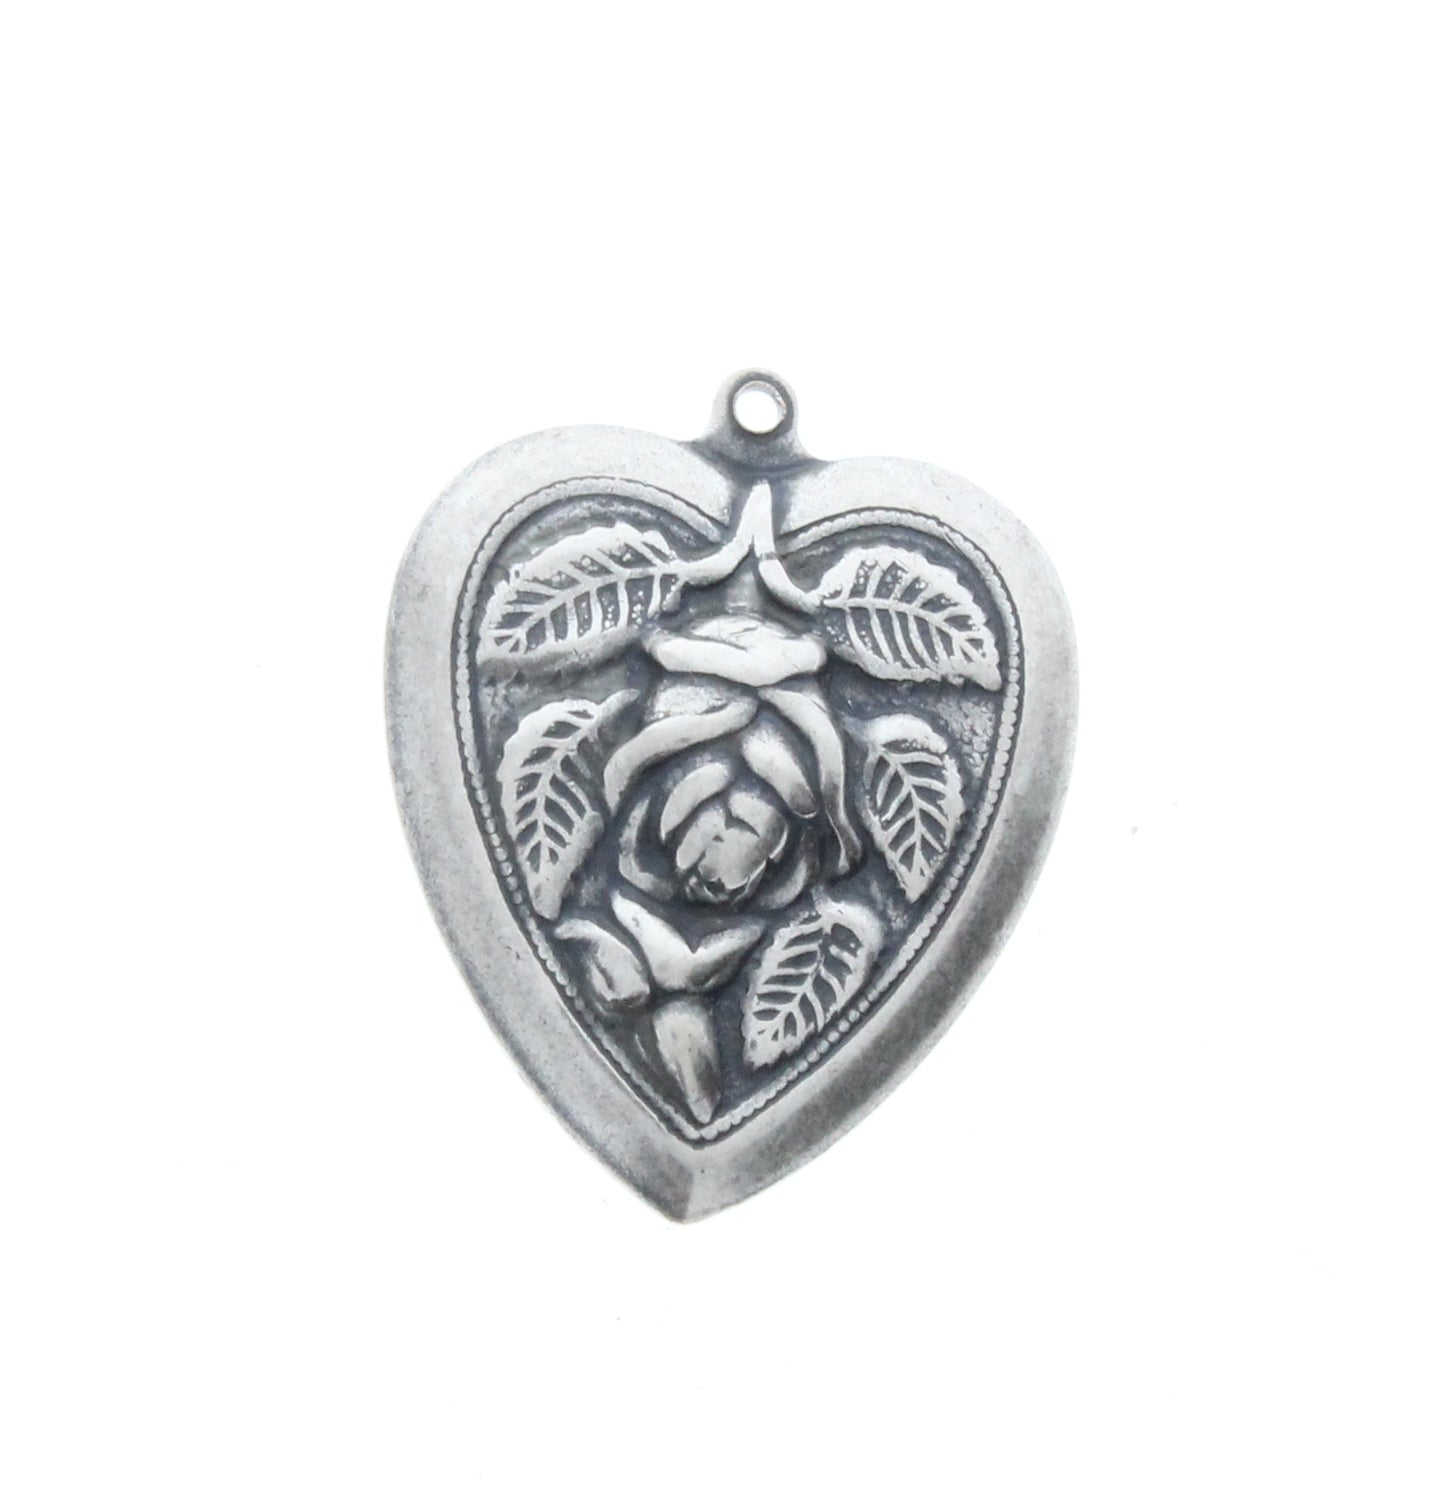 Bright Nickel Heart w/Rose Charm/Pendant, pack of 6